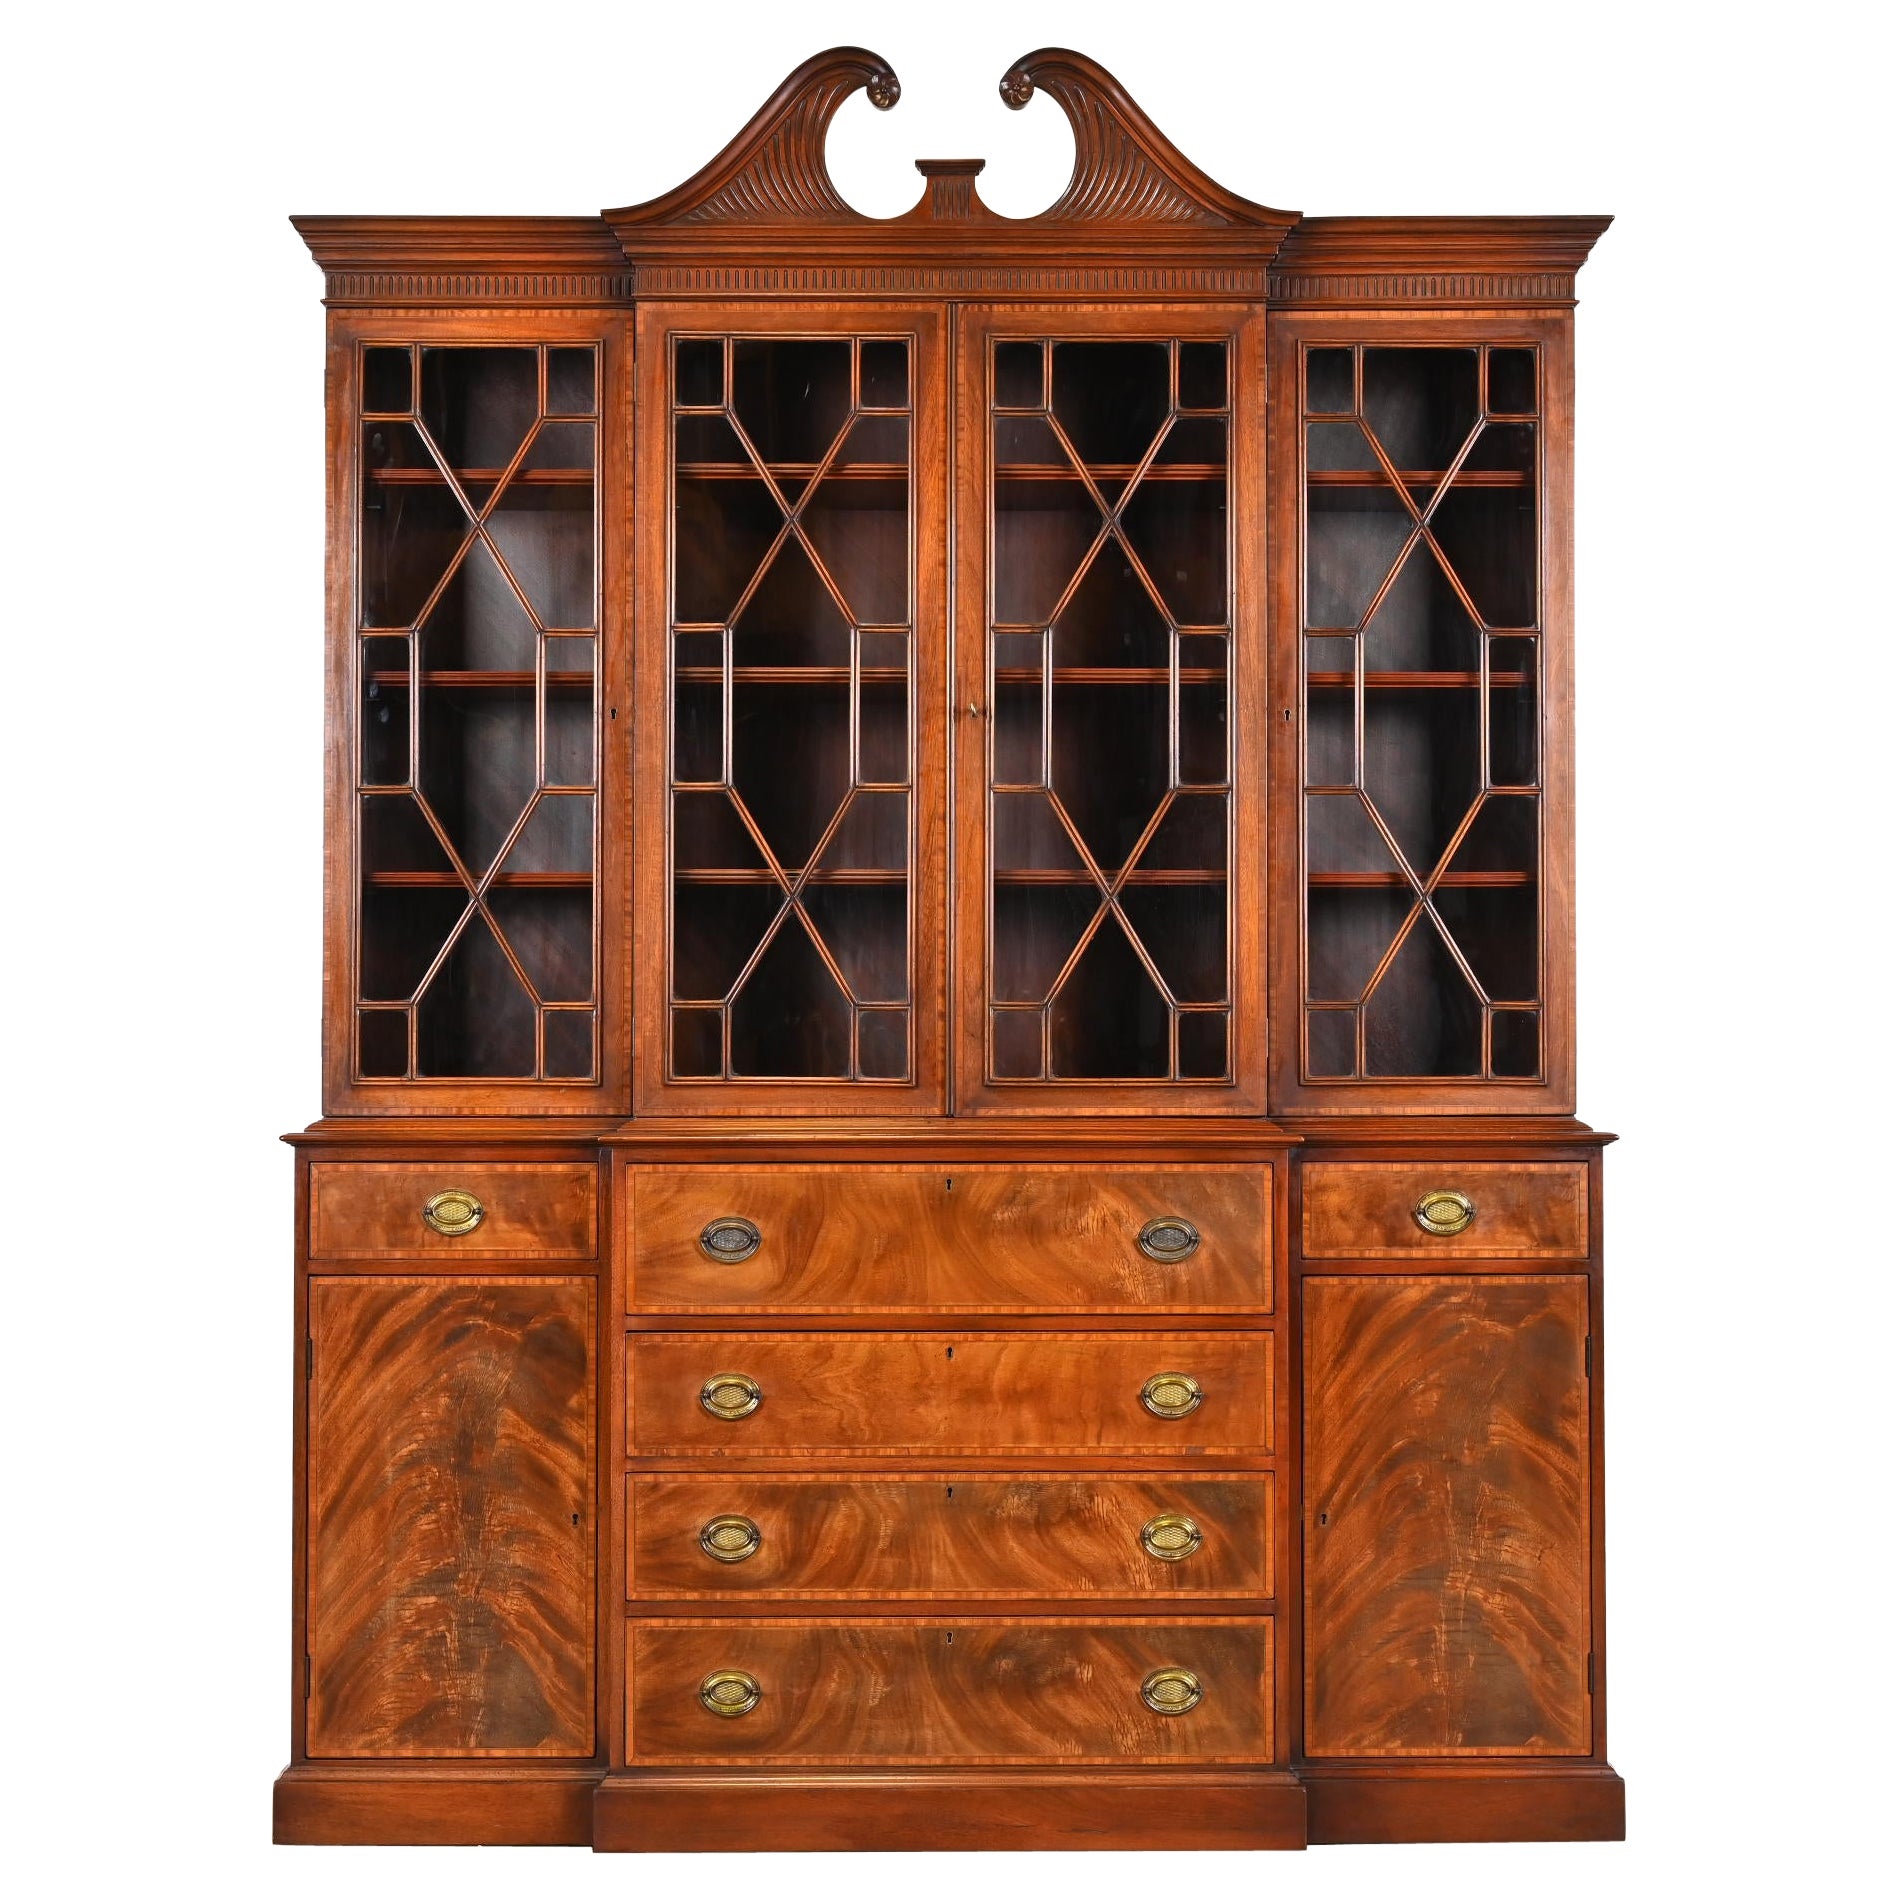 Georgian Carved Mahogany Breakfront Bookcase Cabinet by Beacon Hill